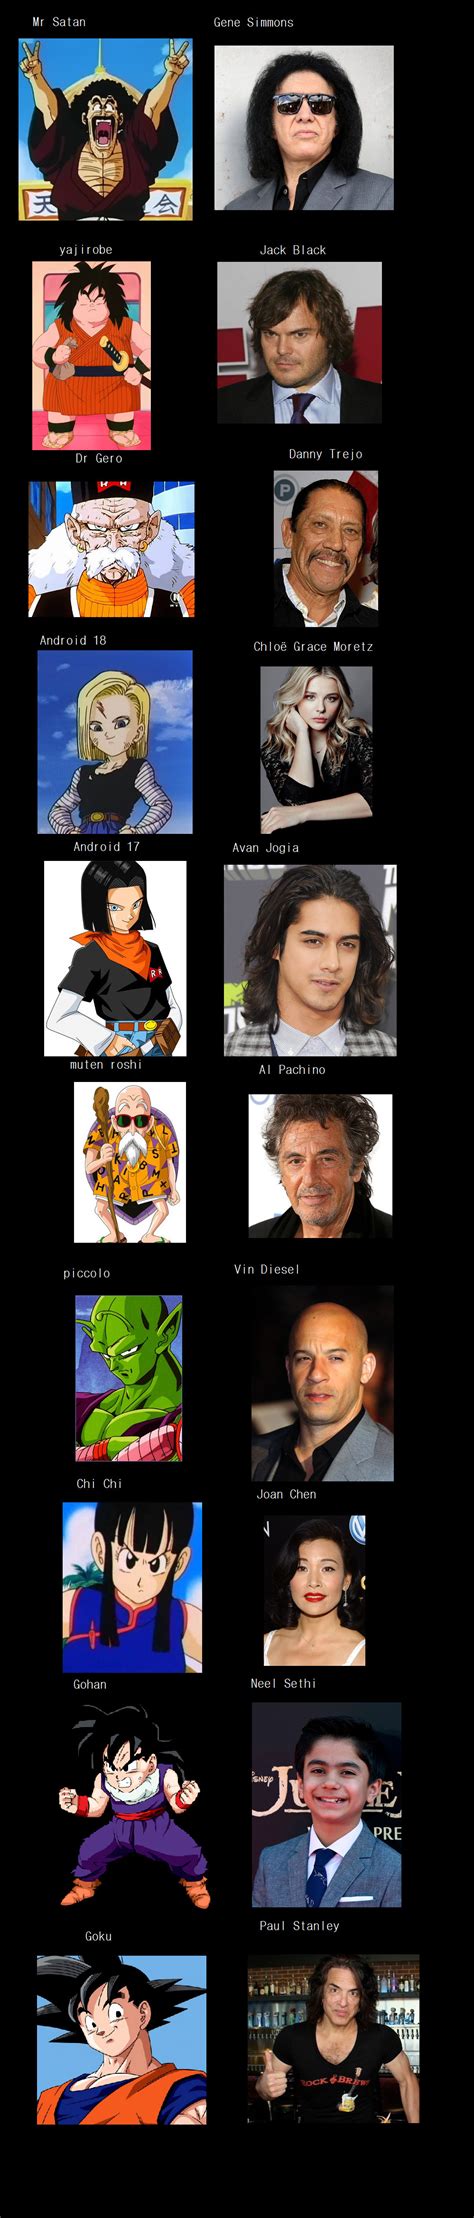 The list below contains full videos for every movie, so you can watch them in their. My Dragon ball z movie cast list by stellaantoine on DeviantArt